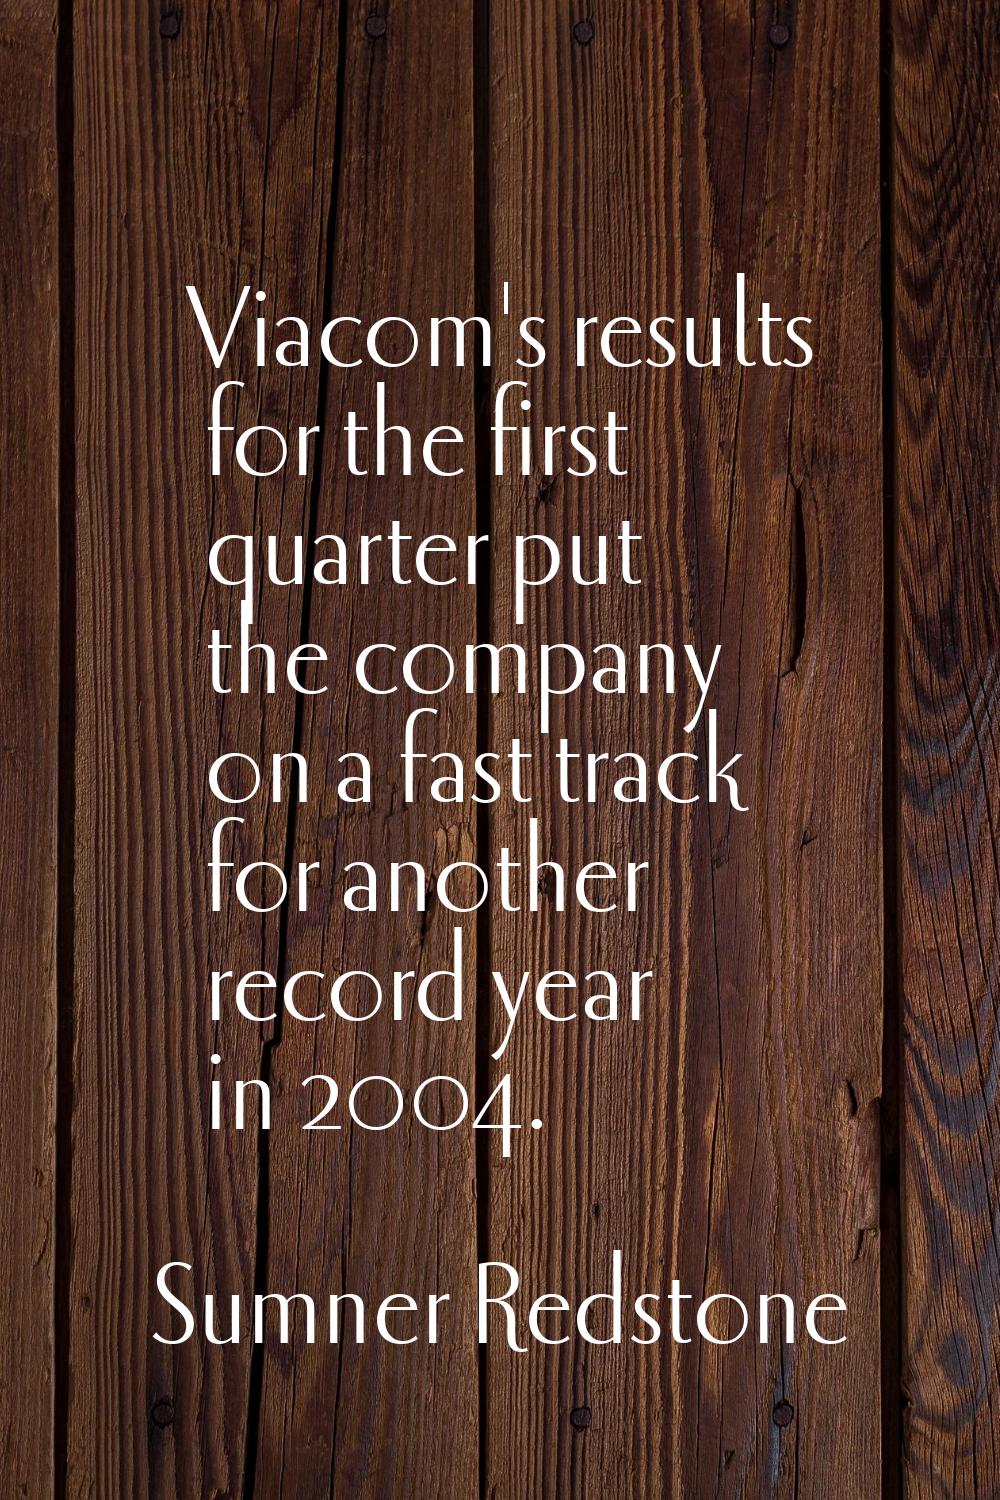 Viacom's results for the first quarter put the company on a fast track for another record year in 2